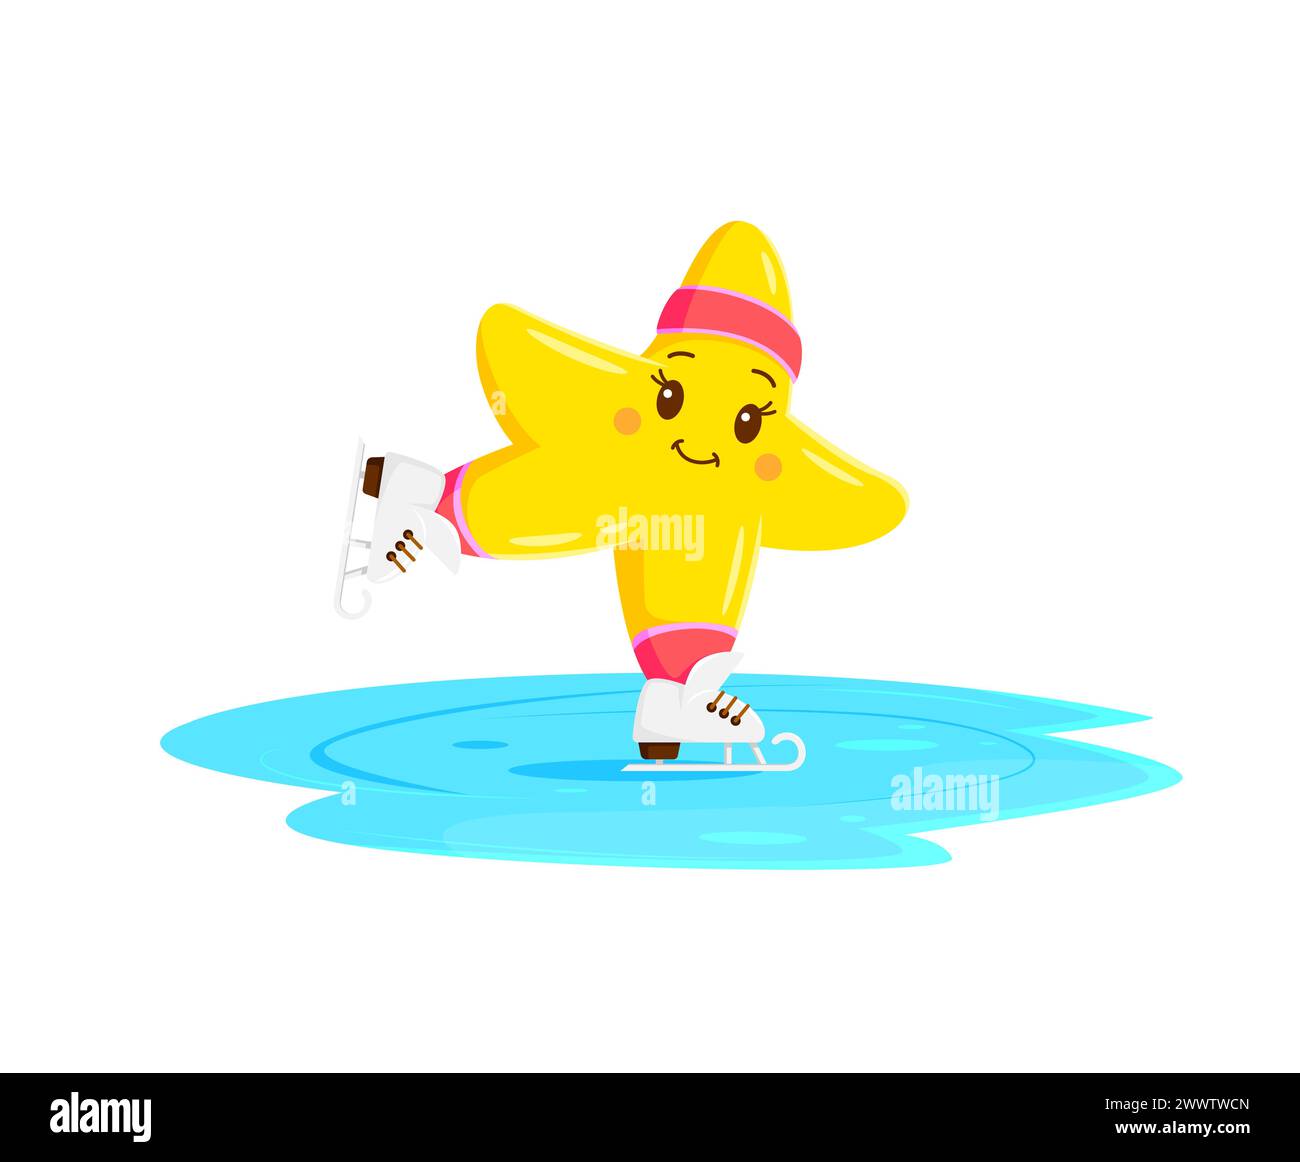 Cartoon kawaii star character skating on the skating rink. Isolated vector twinkle personage glides gracefully on ice, its cheeks blushing pink and ey Stock Vector